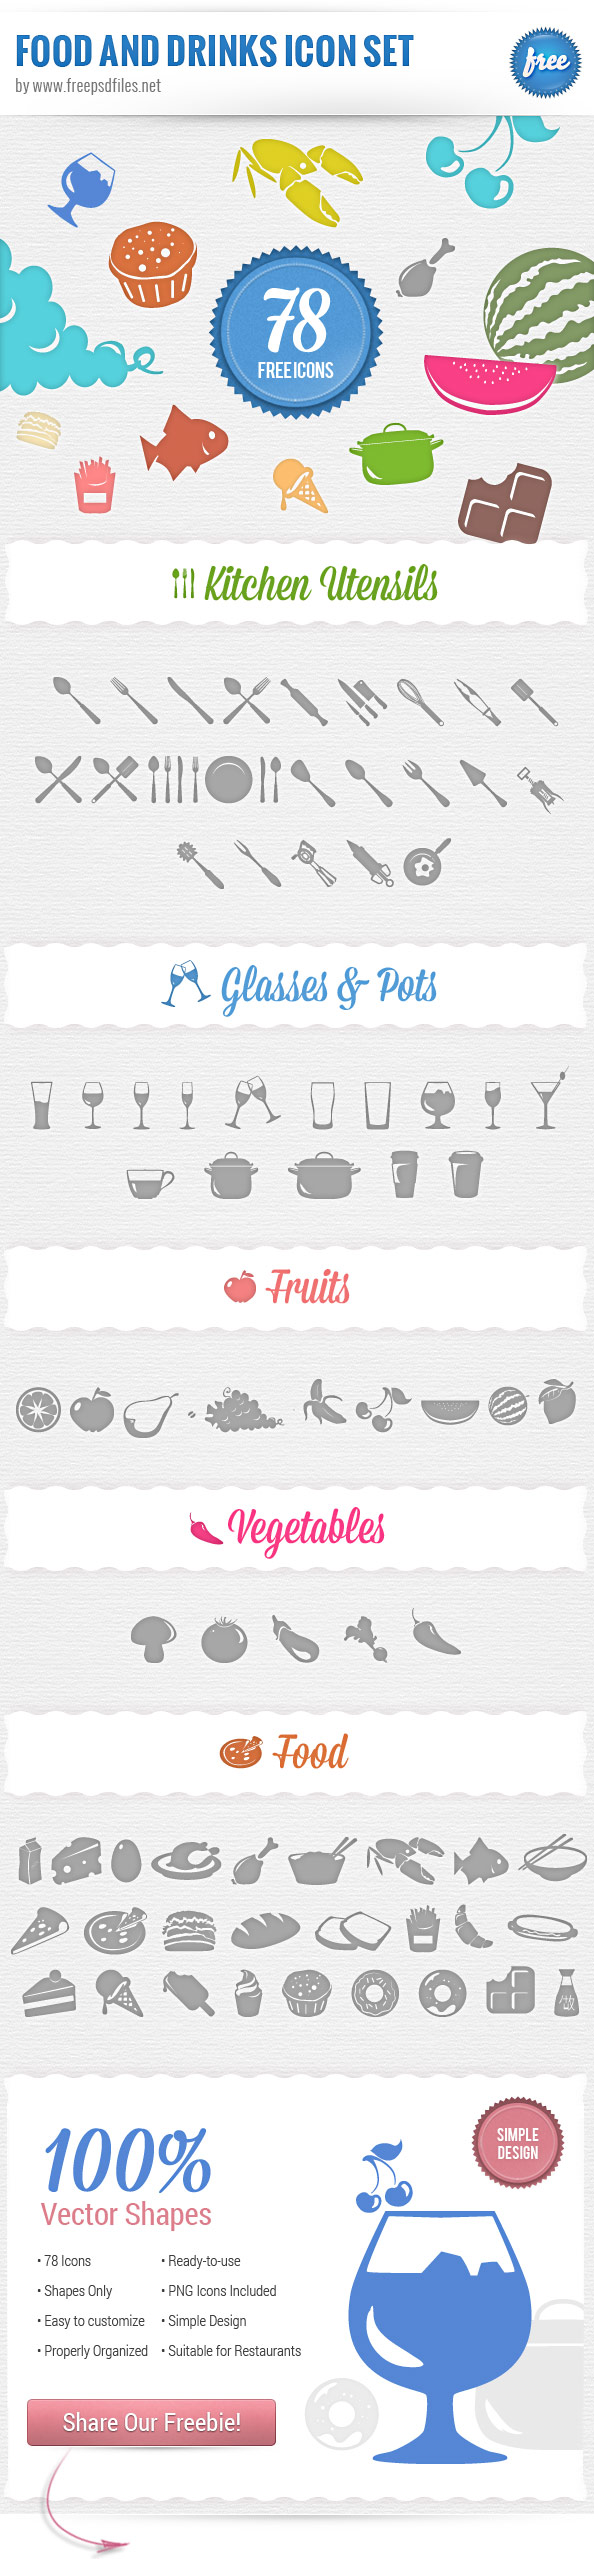 Food Icons PSD Set Preview